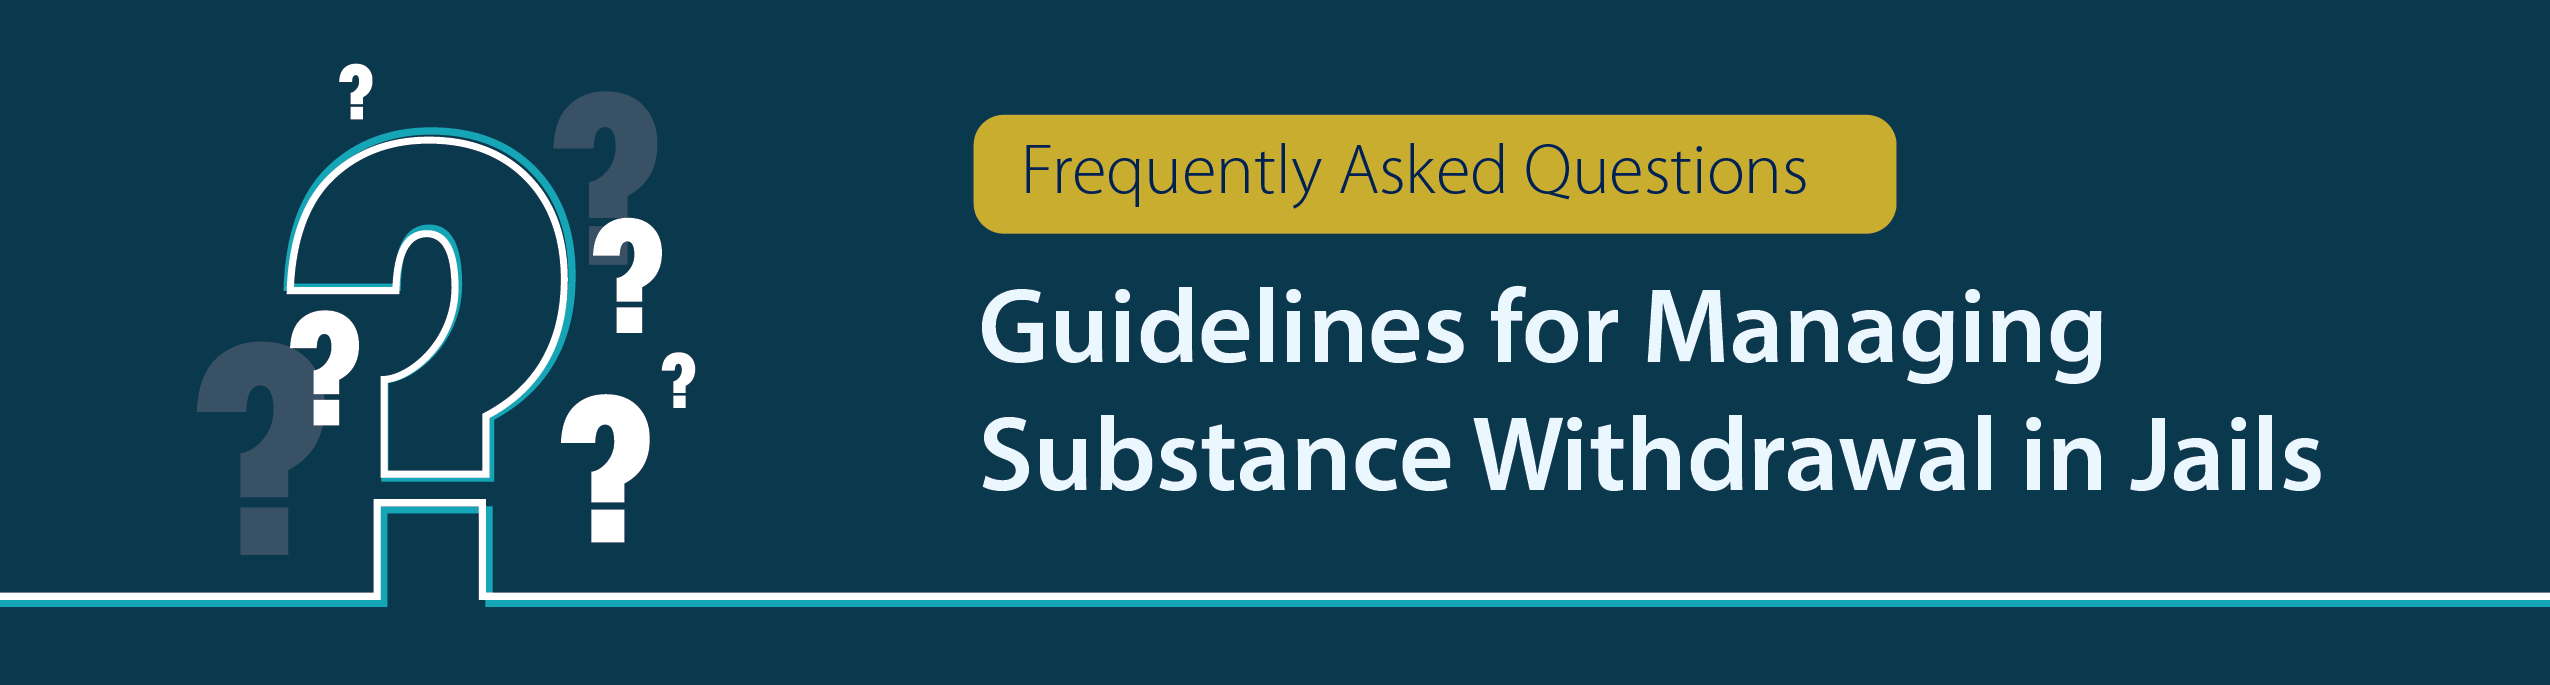 Guidelines Frequently Asked Questions